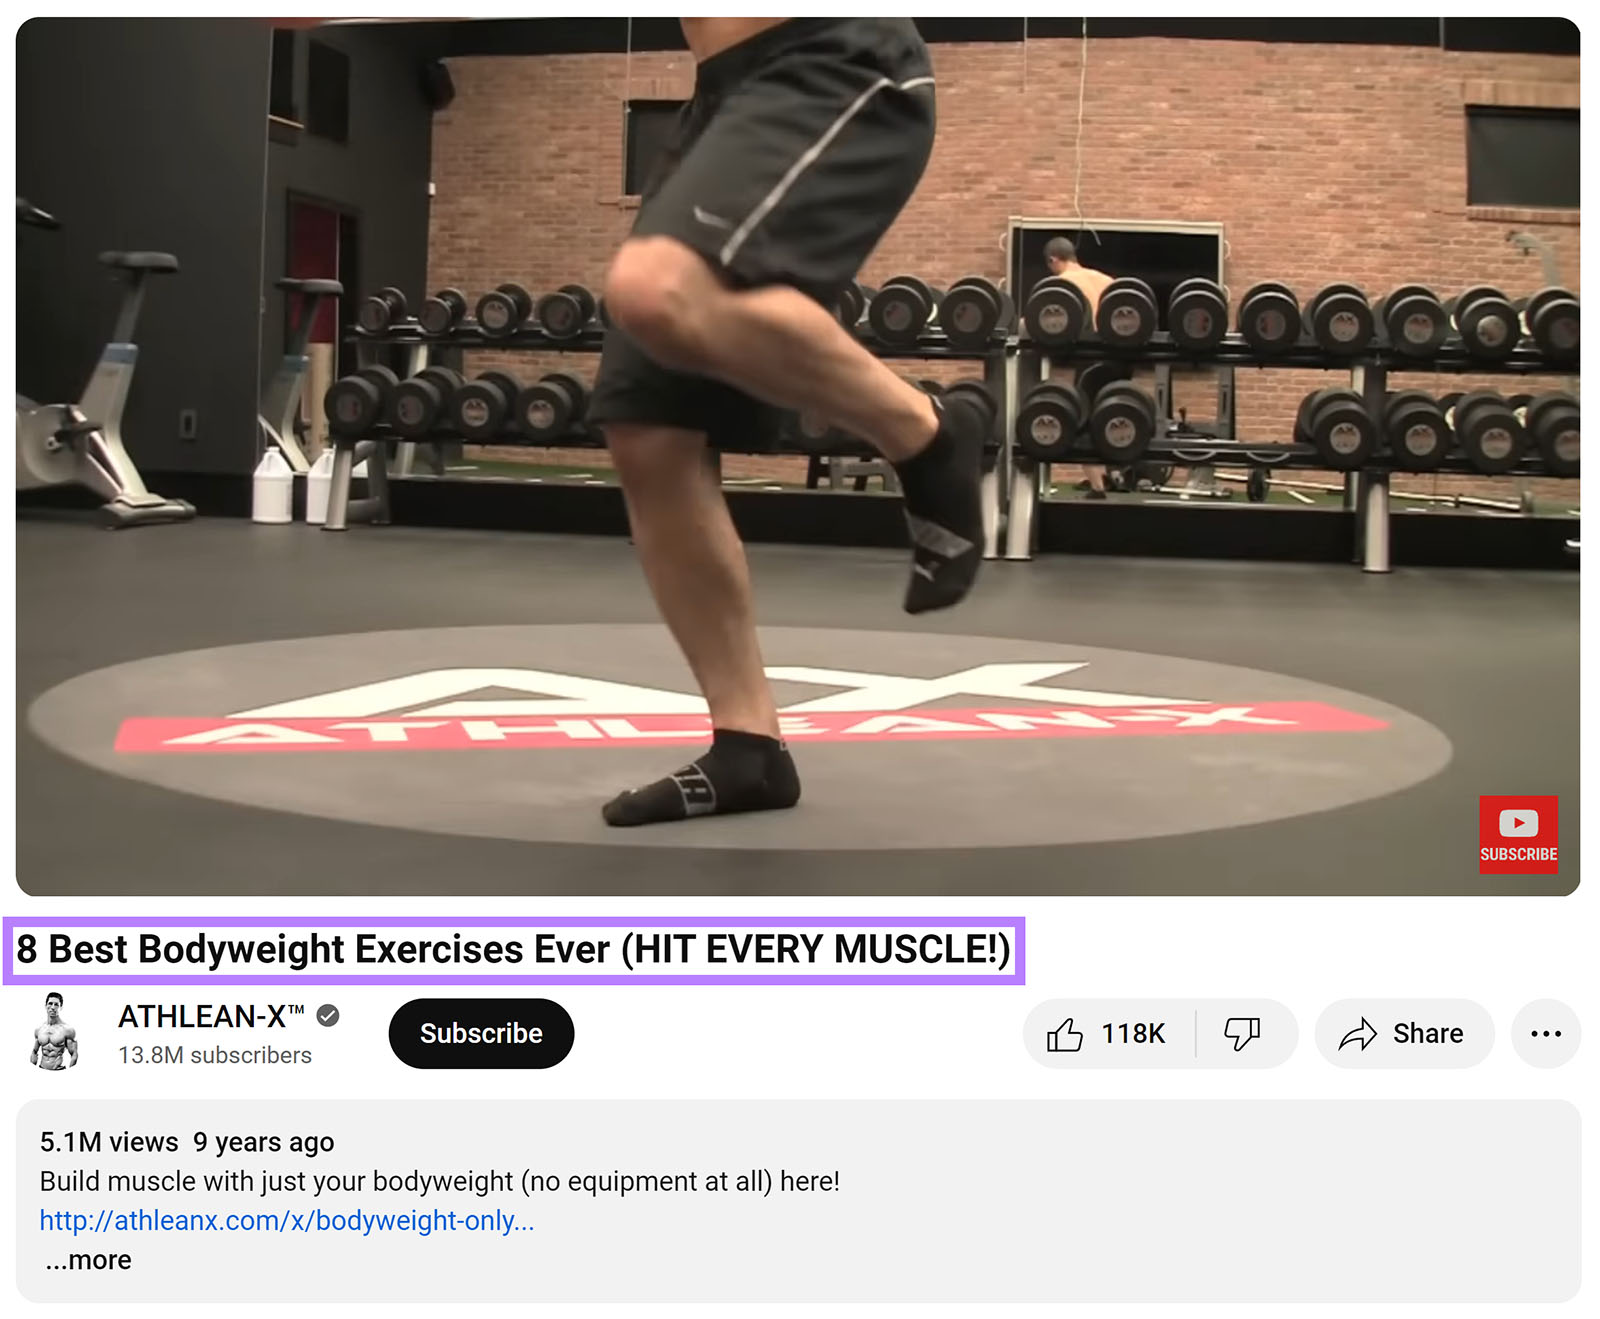 Athlean-X video '8 best bodyweight exercises ever (HIT EVERY MUSCLE)' with title highlighted.